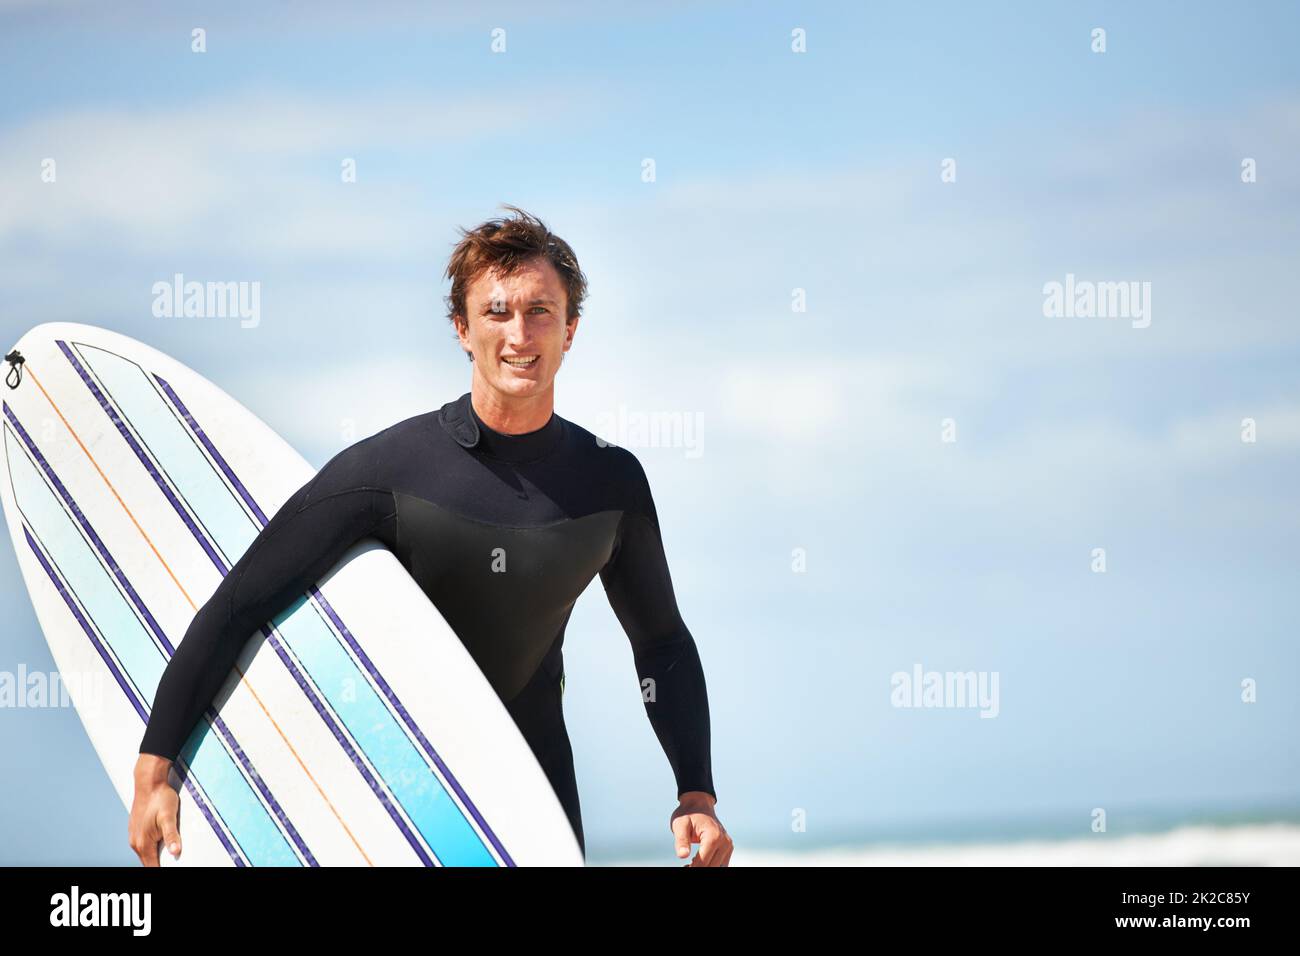 Its just me and my surfboard. Portrait of a young surfer at the beach on a sunny day. Stock Photo